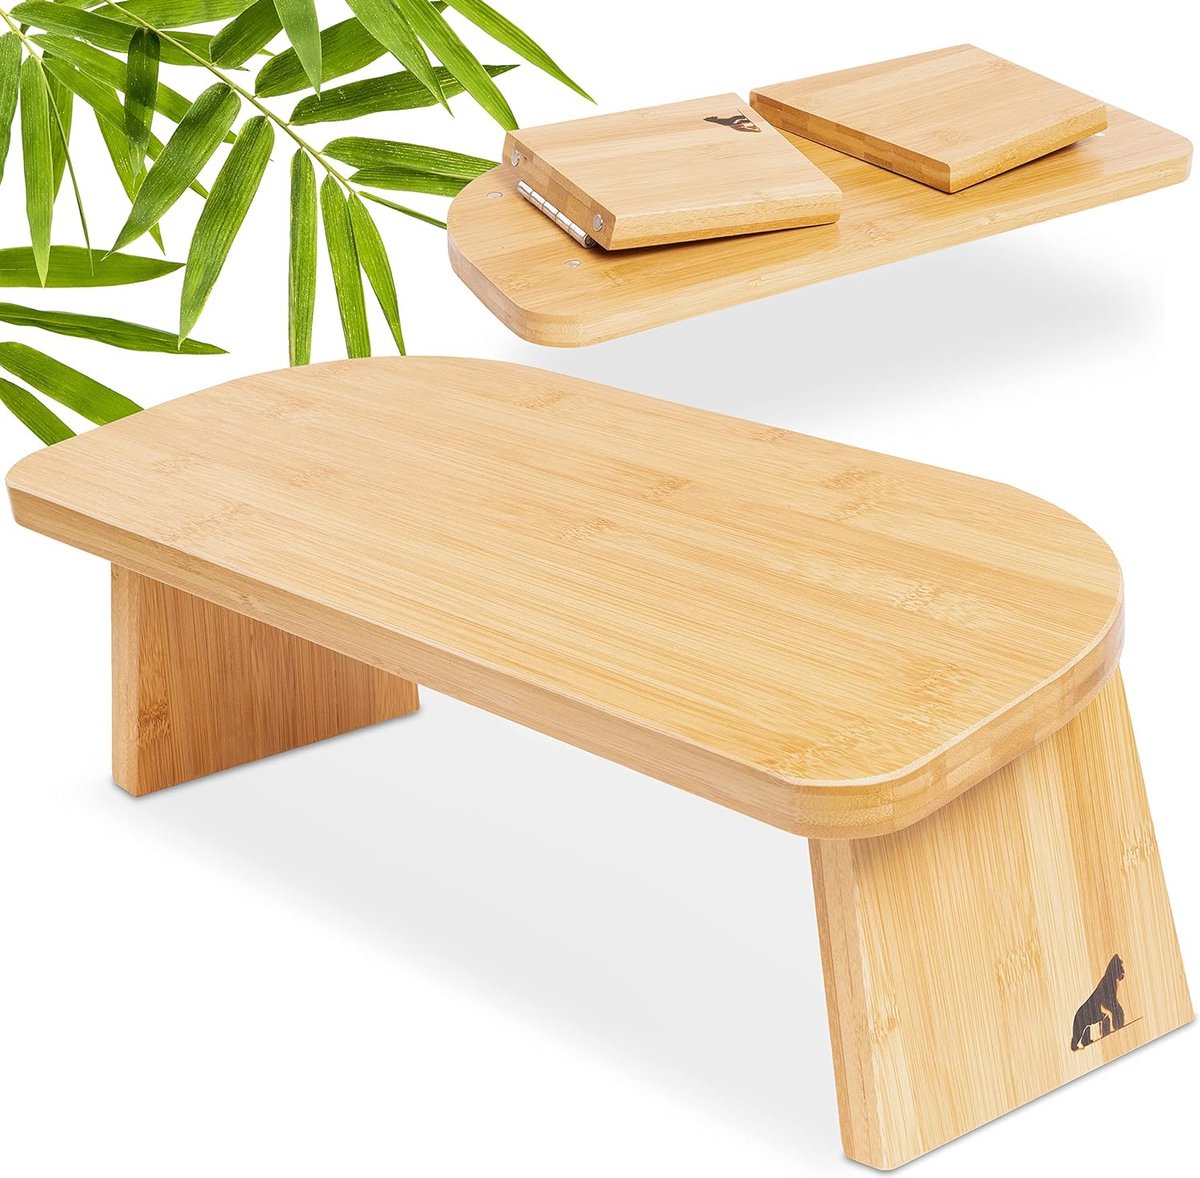 My Fat Gorilla Foldable Bamboo Meditation Bench - Yoga Stool for Deep Meditation and Mindfulness - Ergonomic Sports Equipment Made from Sustainable Bamboo